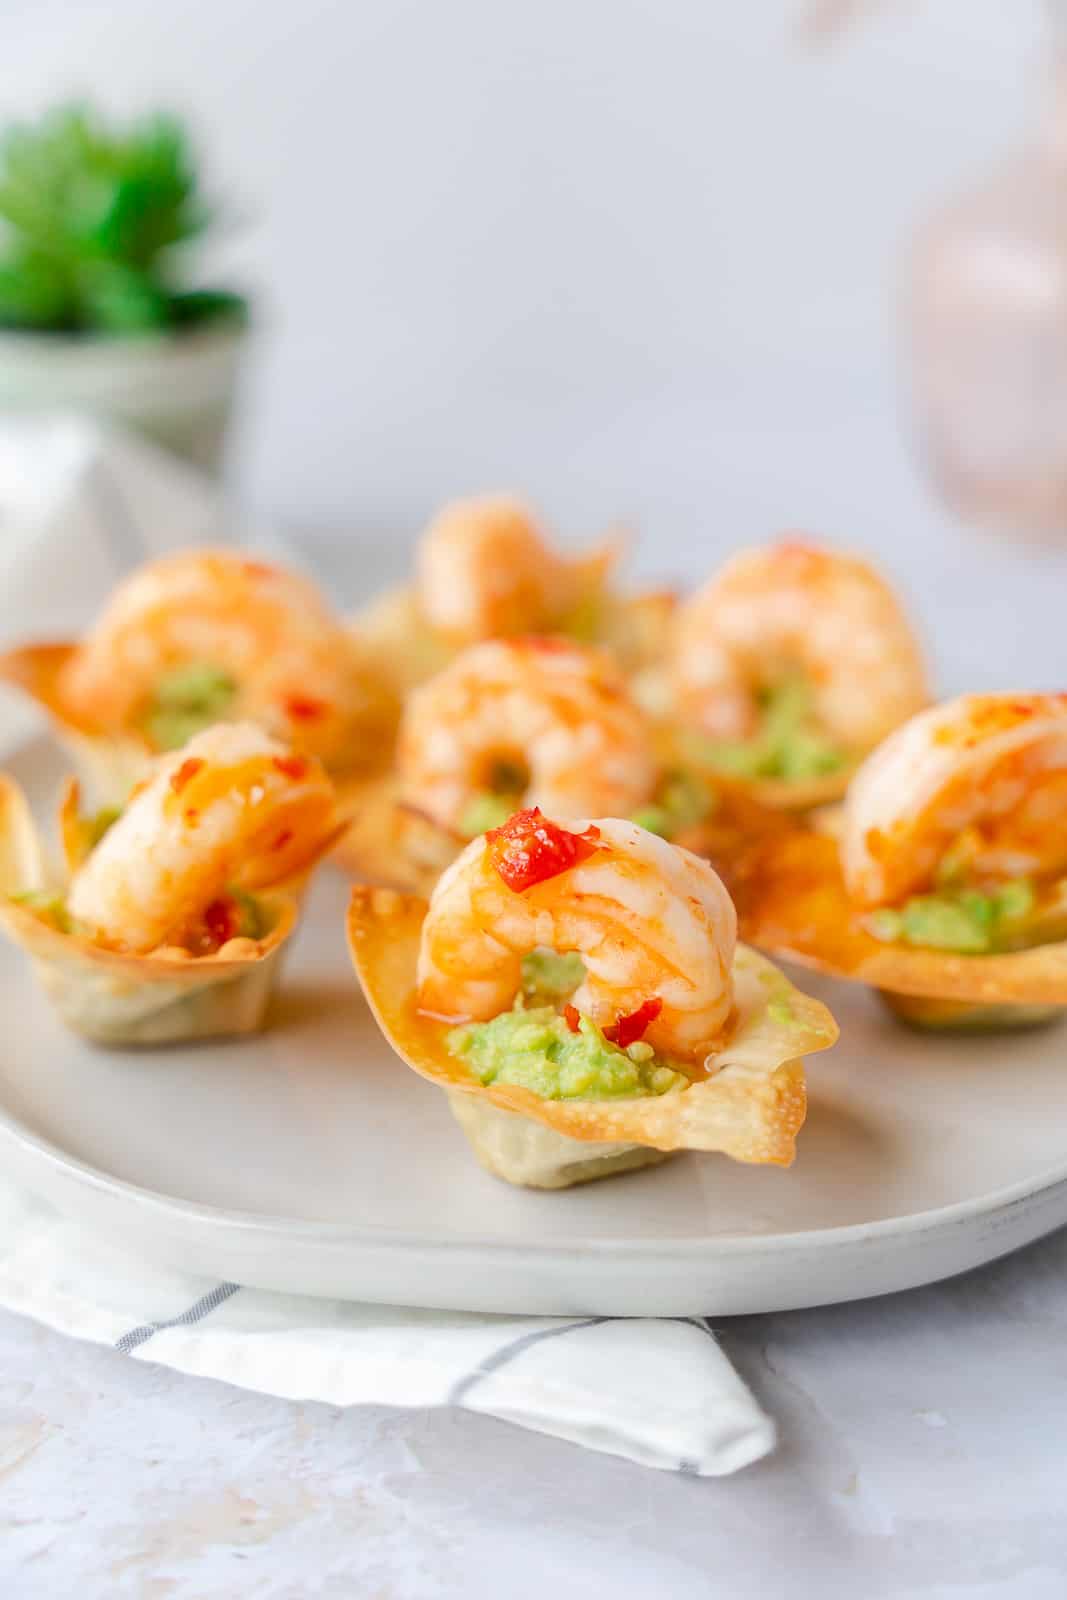 Shrimp and Guacamole cups on a plate.